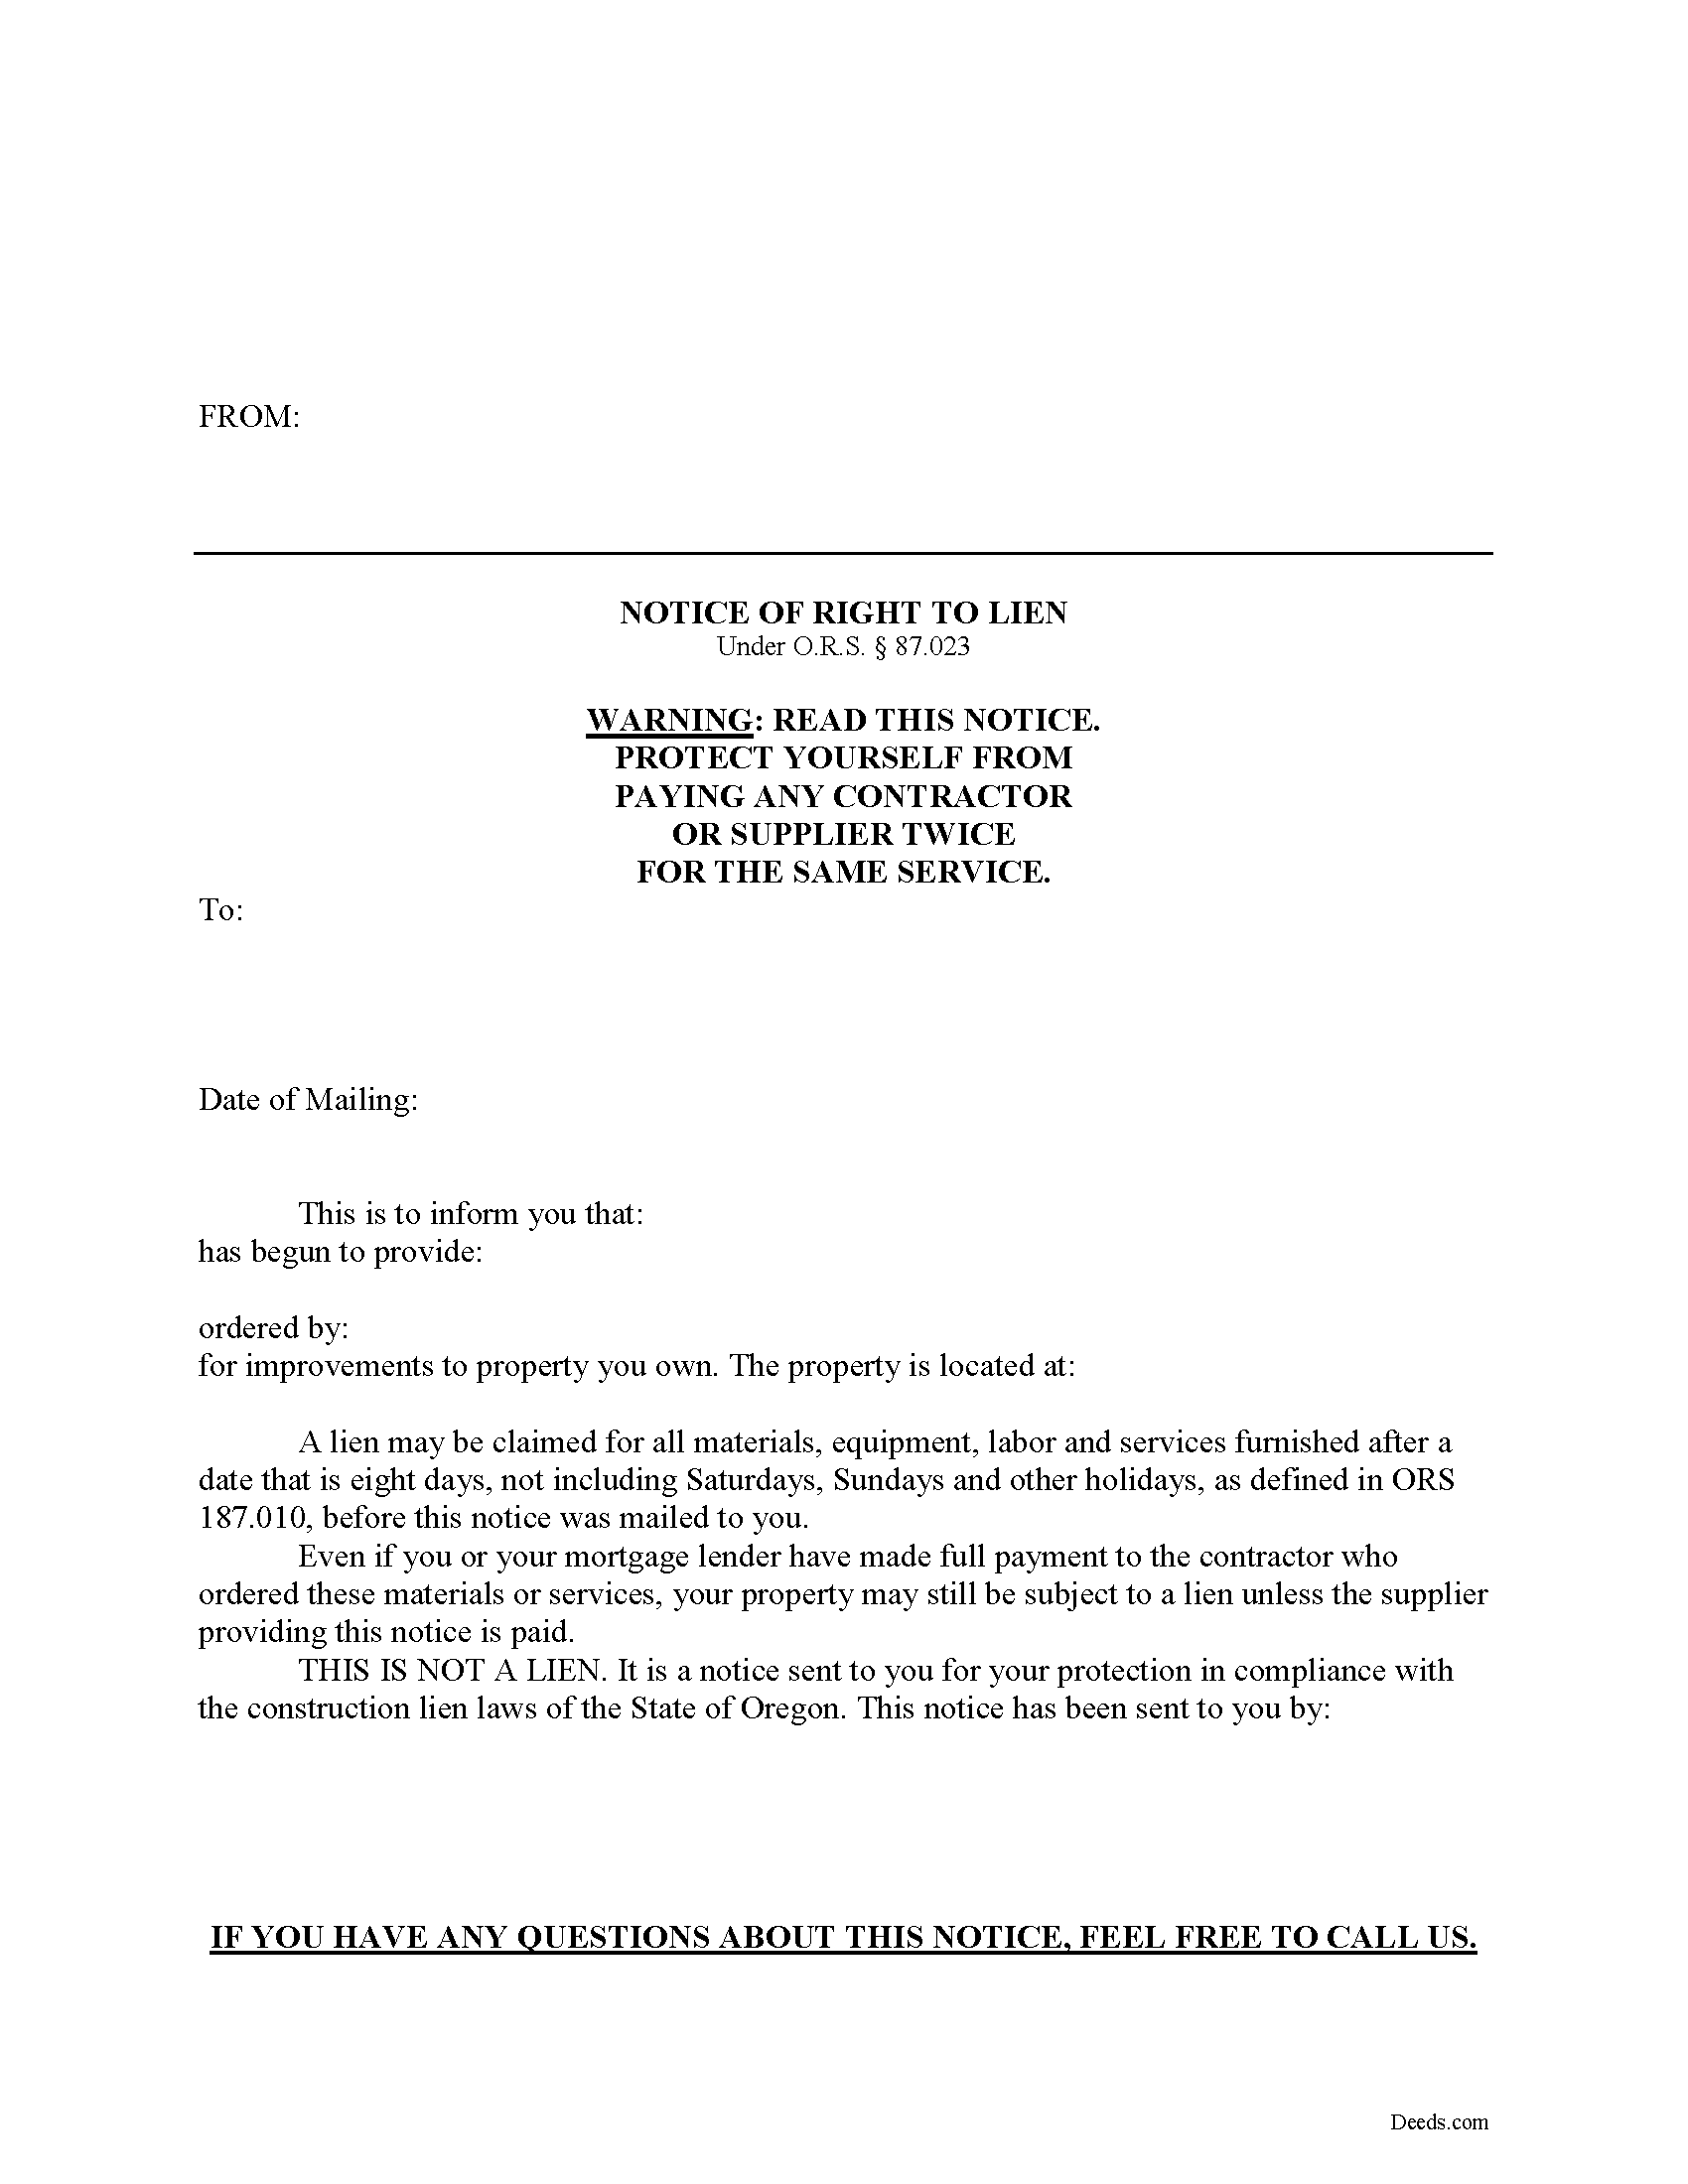 Oregon Notice of Right to Lien Image